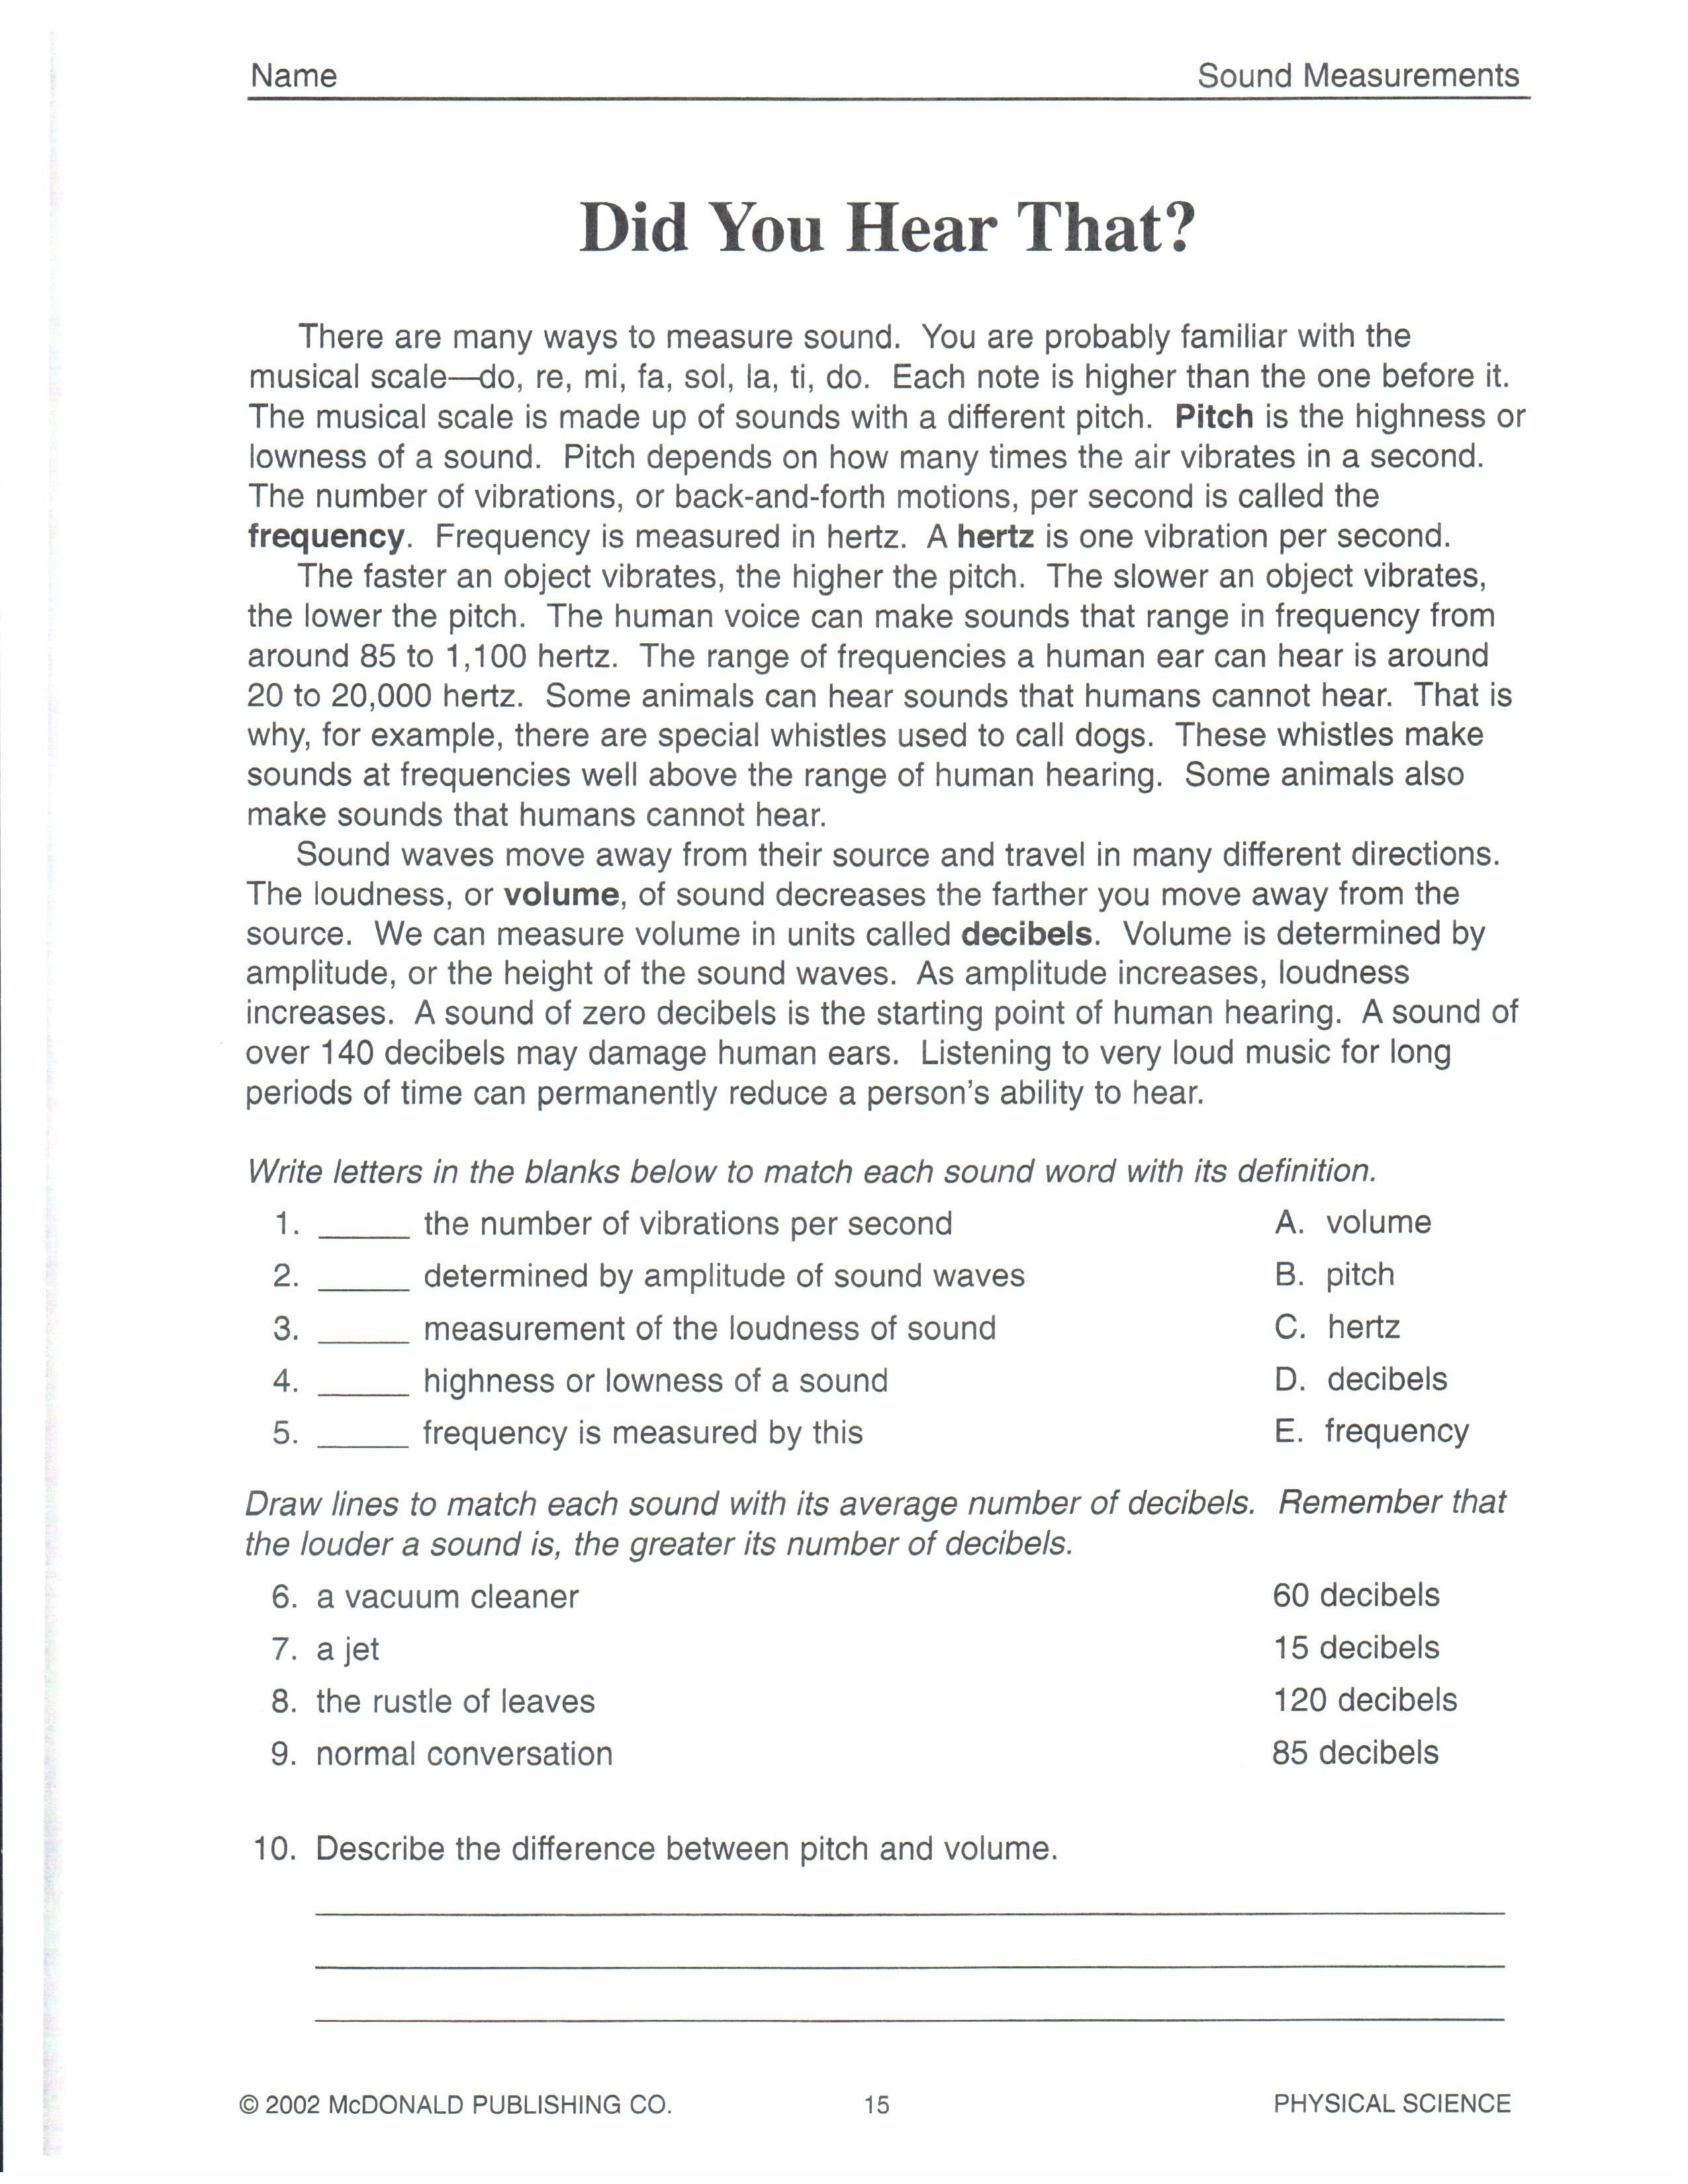 Free 8th Grade Science Worksheets Physical Science Did You Hear that 101roxm 2 5503 300